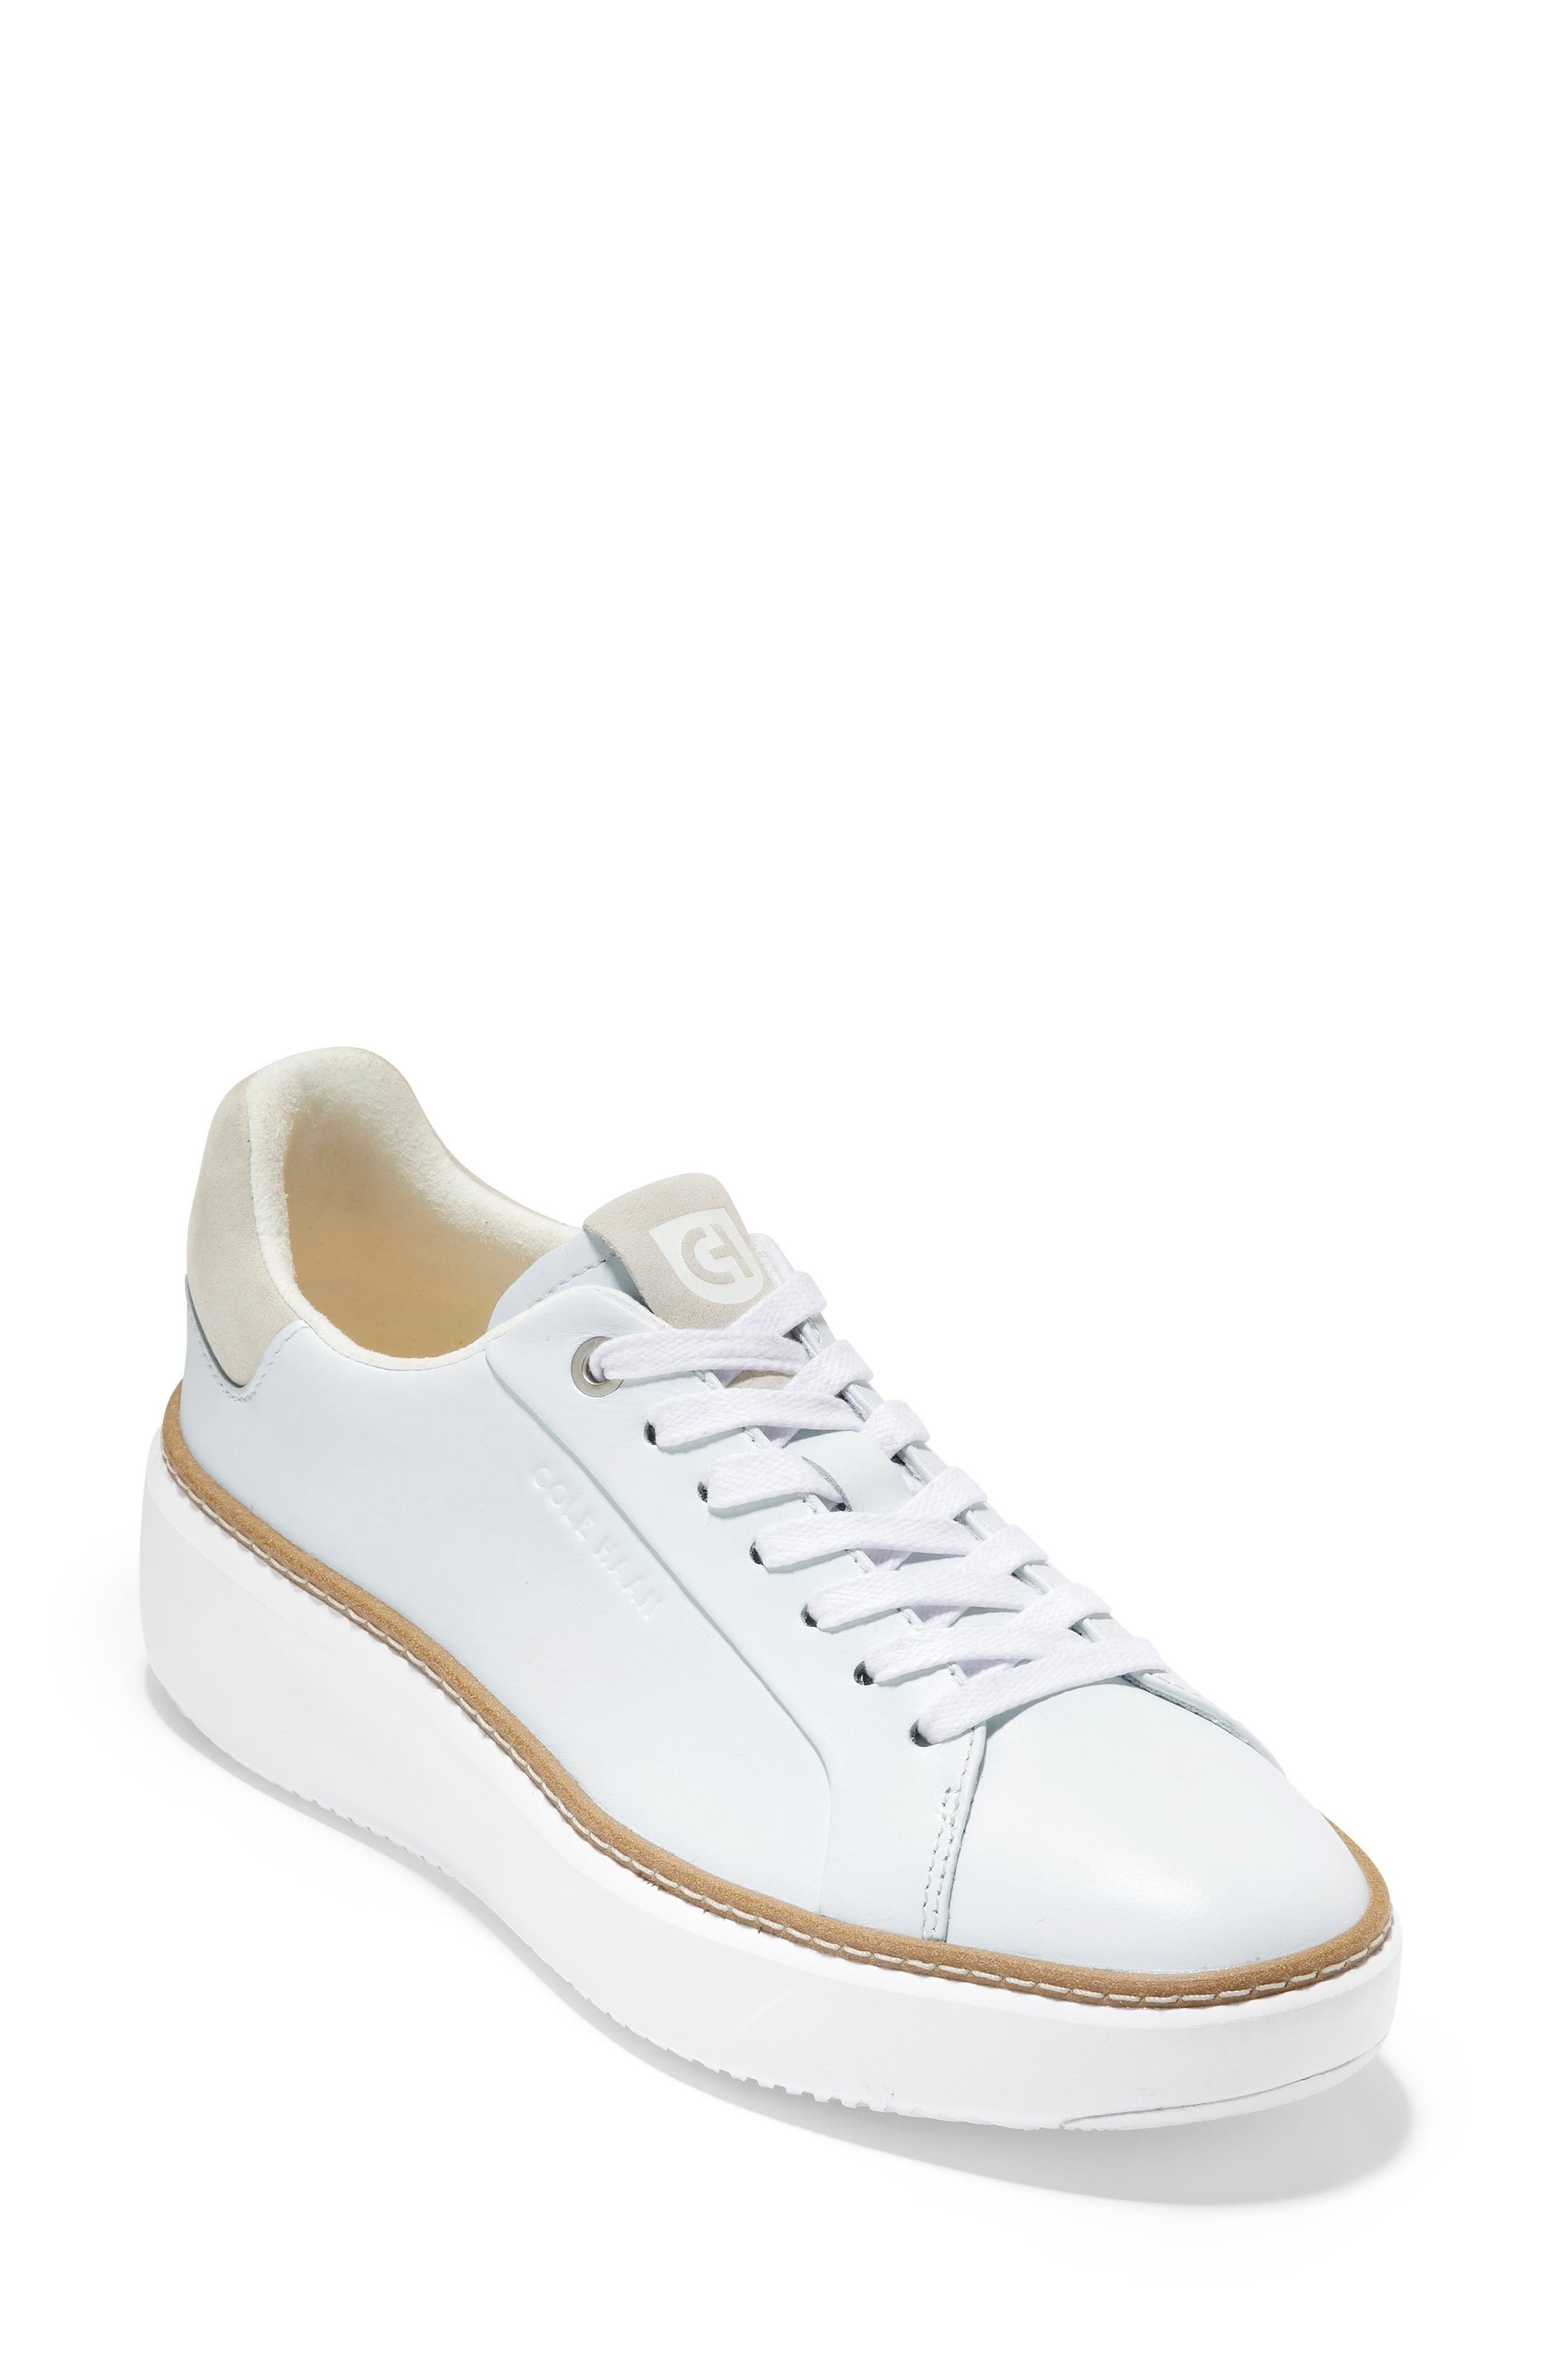 Cole Haan GrandPro Topspin Sneaker in White Dove at Nordstrom, Size 8.5 | Nordstrom